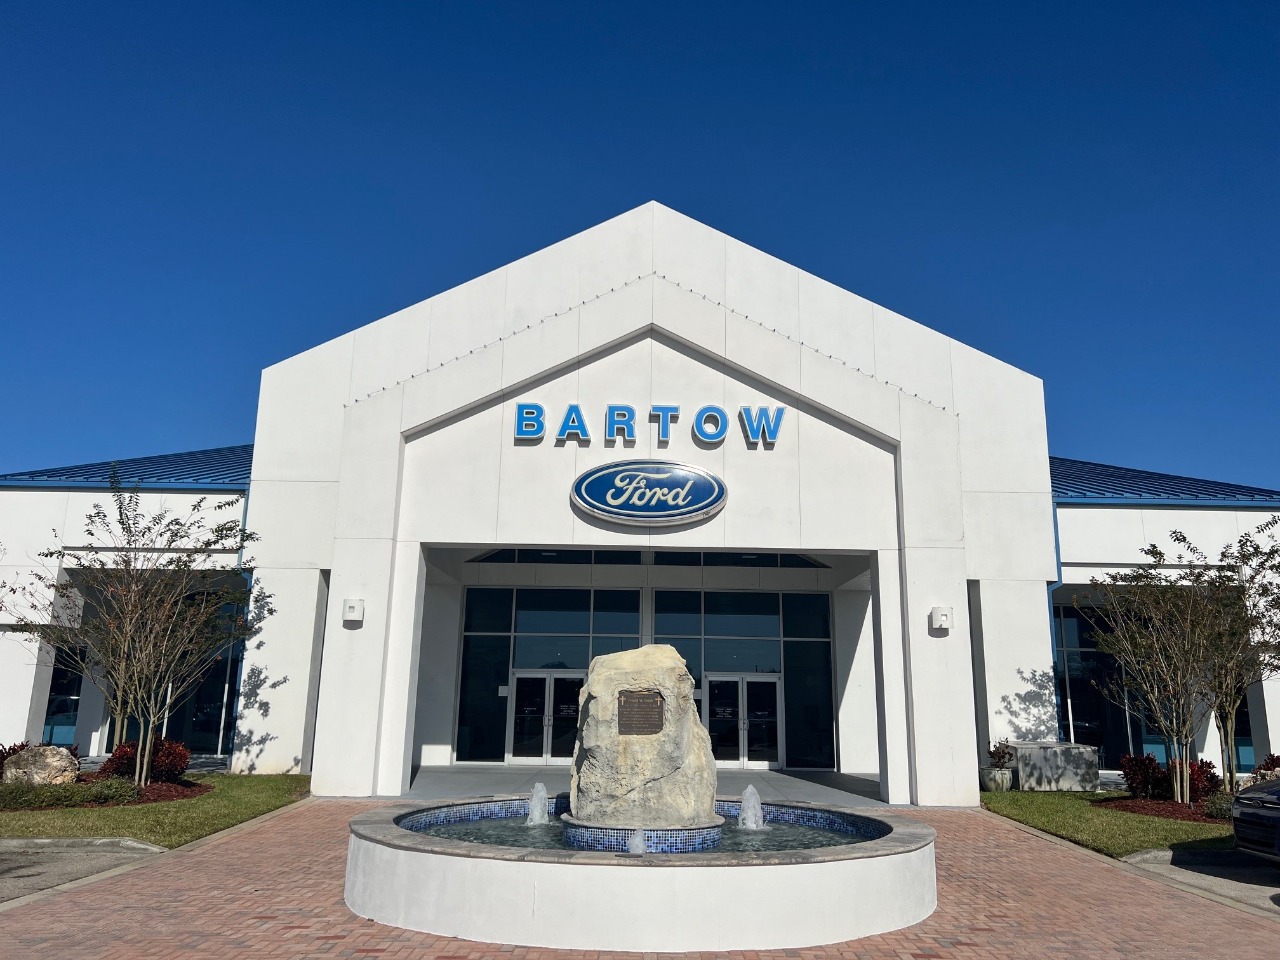 BARTOW FORD CO.